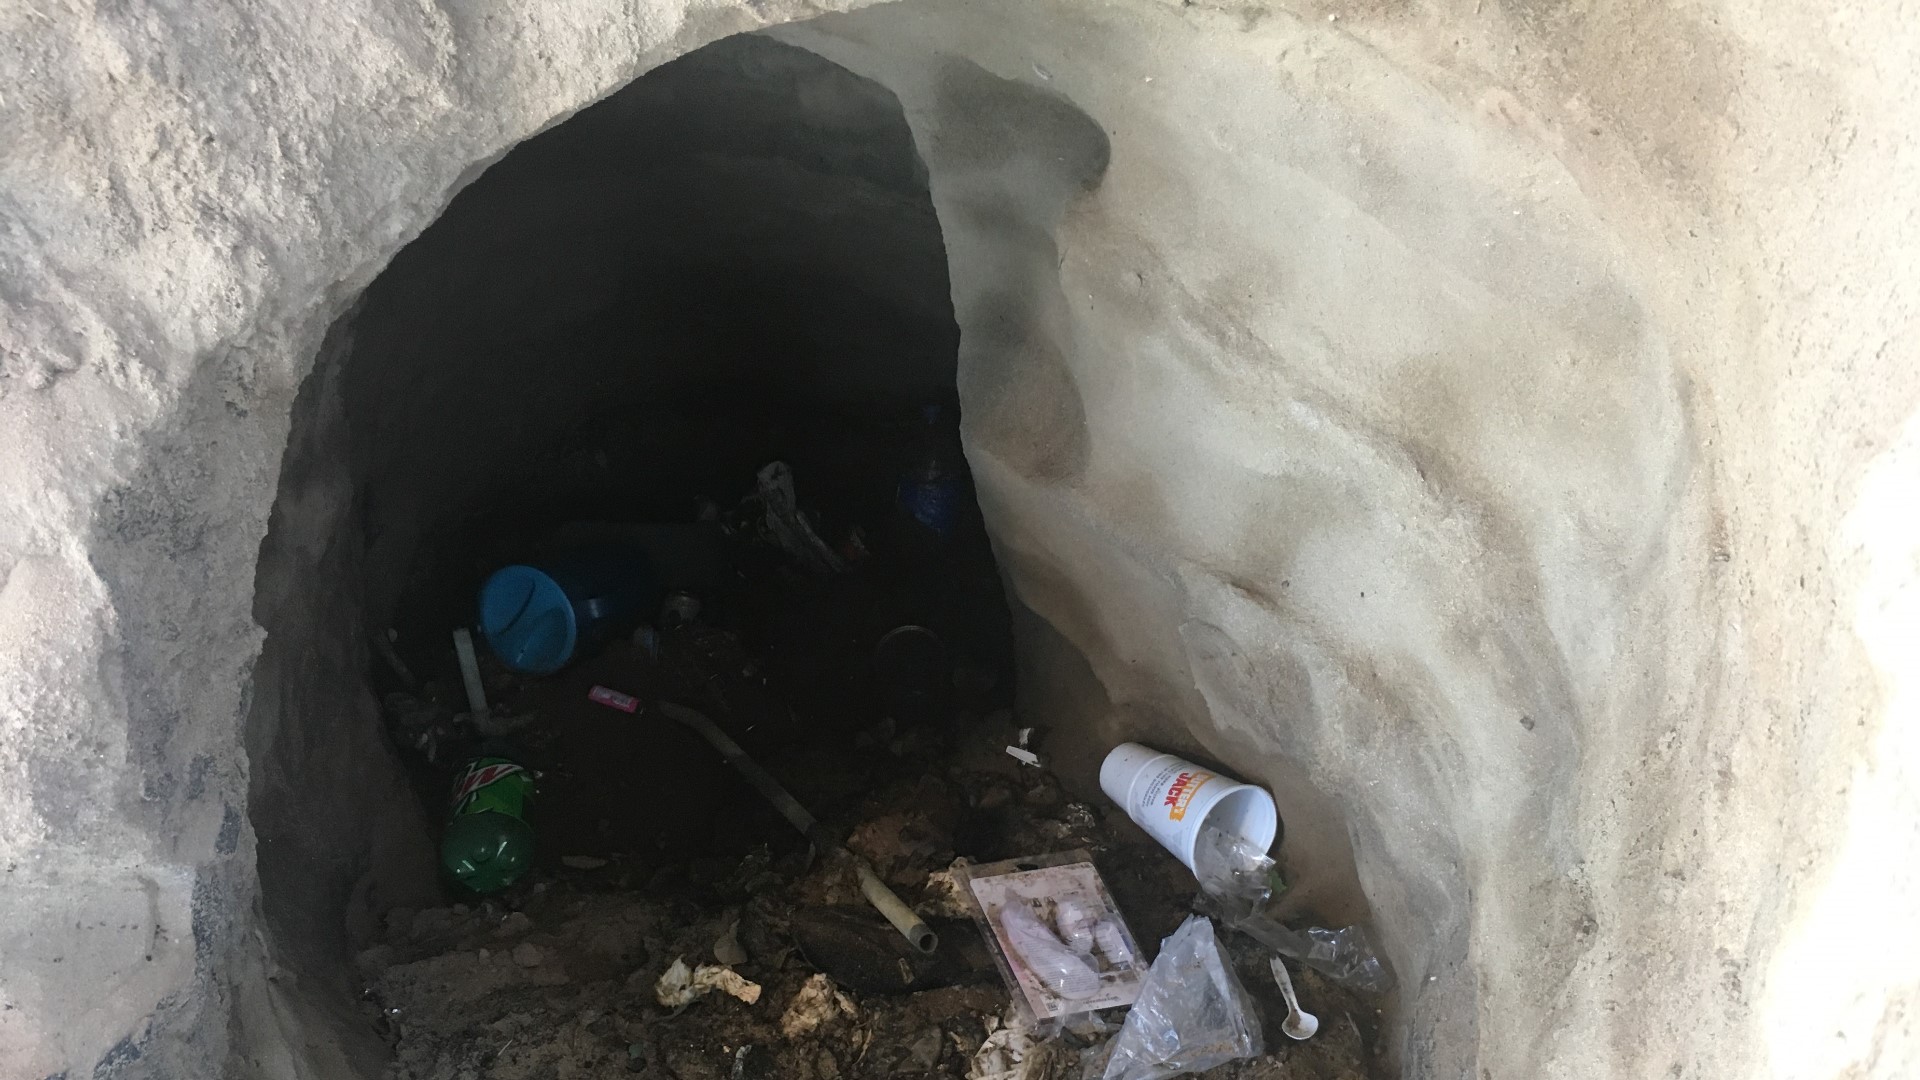 A hole under an overpass near Highway 99 has officials concerned about the embankment's integrity. For the Manteca's public works director, it's something he hasn't seen in the 12 year's he's been serving as a director.